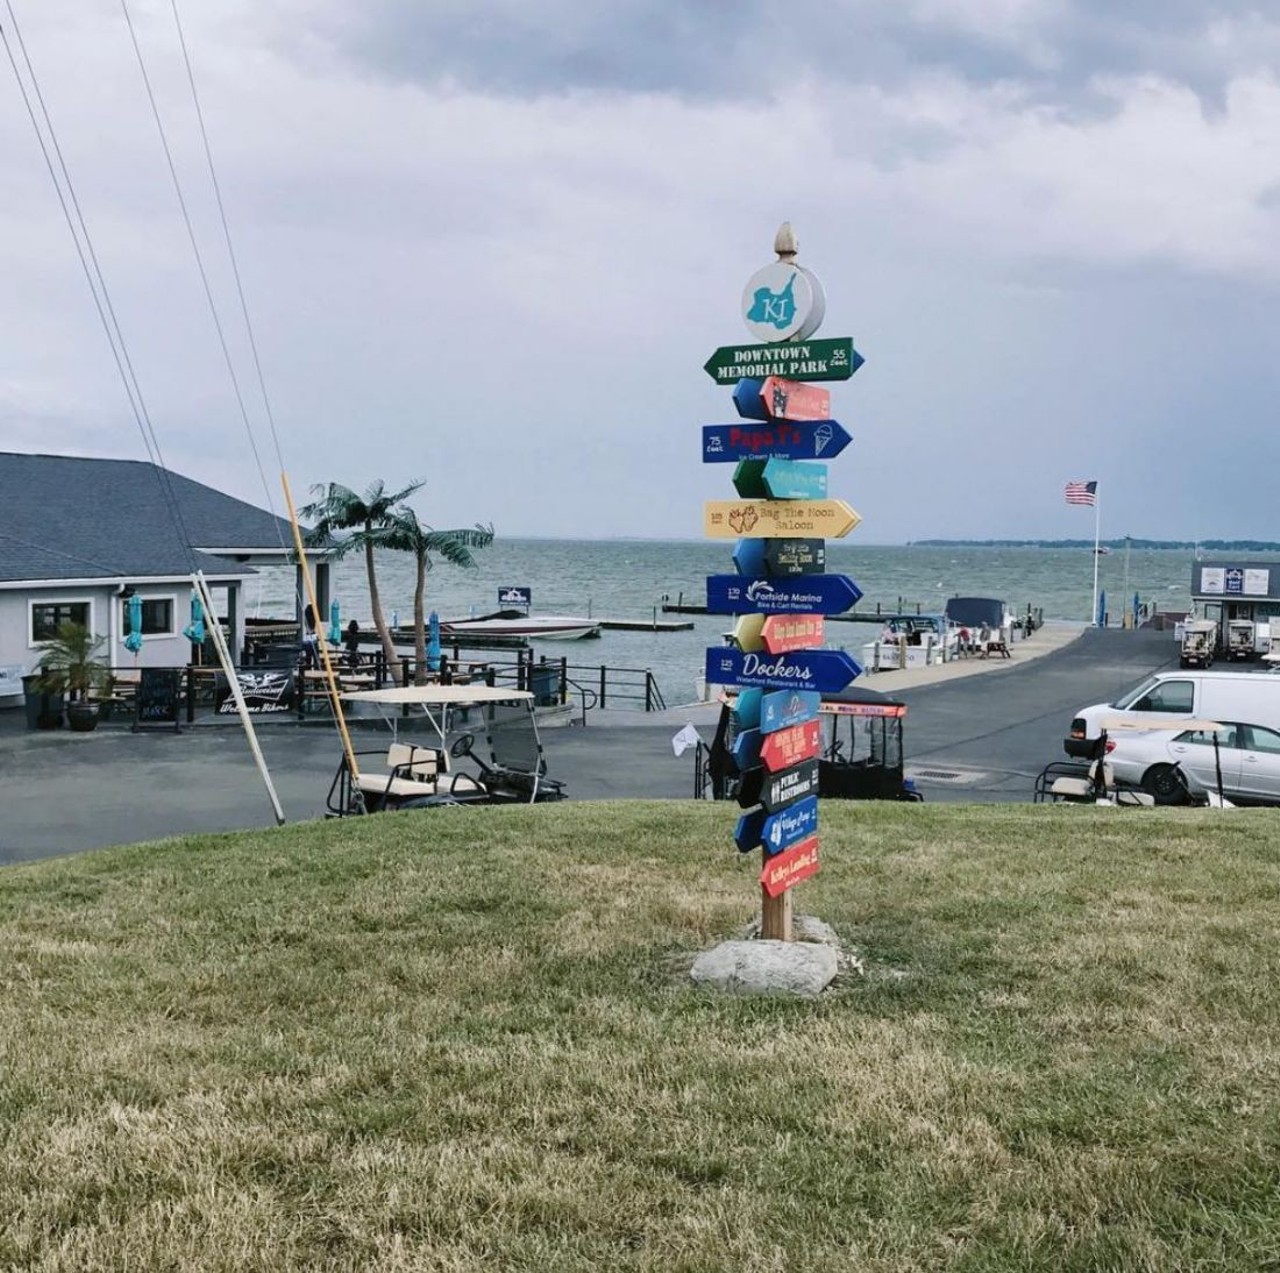 Kelleys Island
1169 N Buck Rd., Lakeside Marblehead, 419-746-2546
Kelleys Island is a popular Ohio vacation spot with tons of restaurants, shopping areas and, of course, scenic views of Lake Erie. 
Photo via __qzb__/Instagram